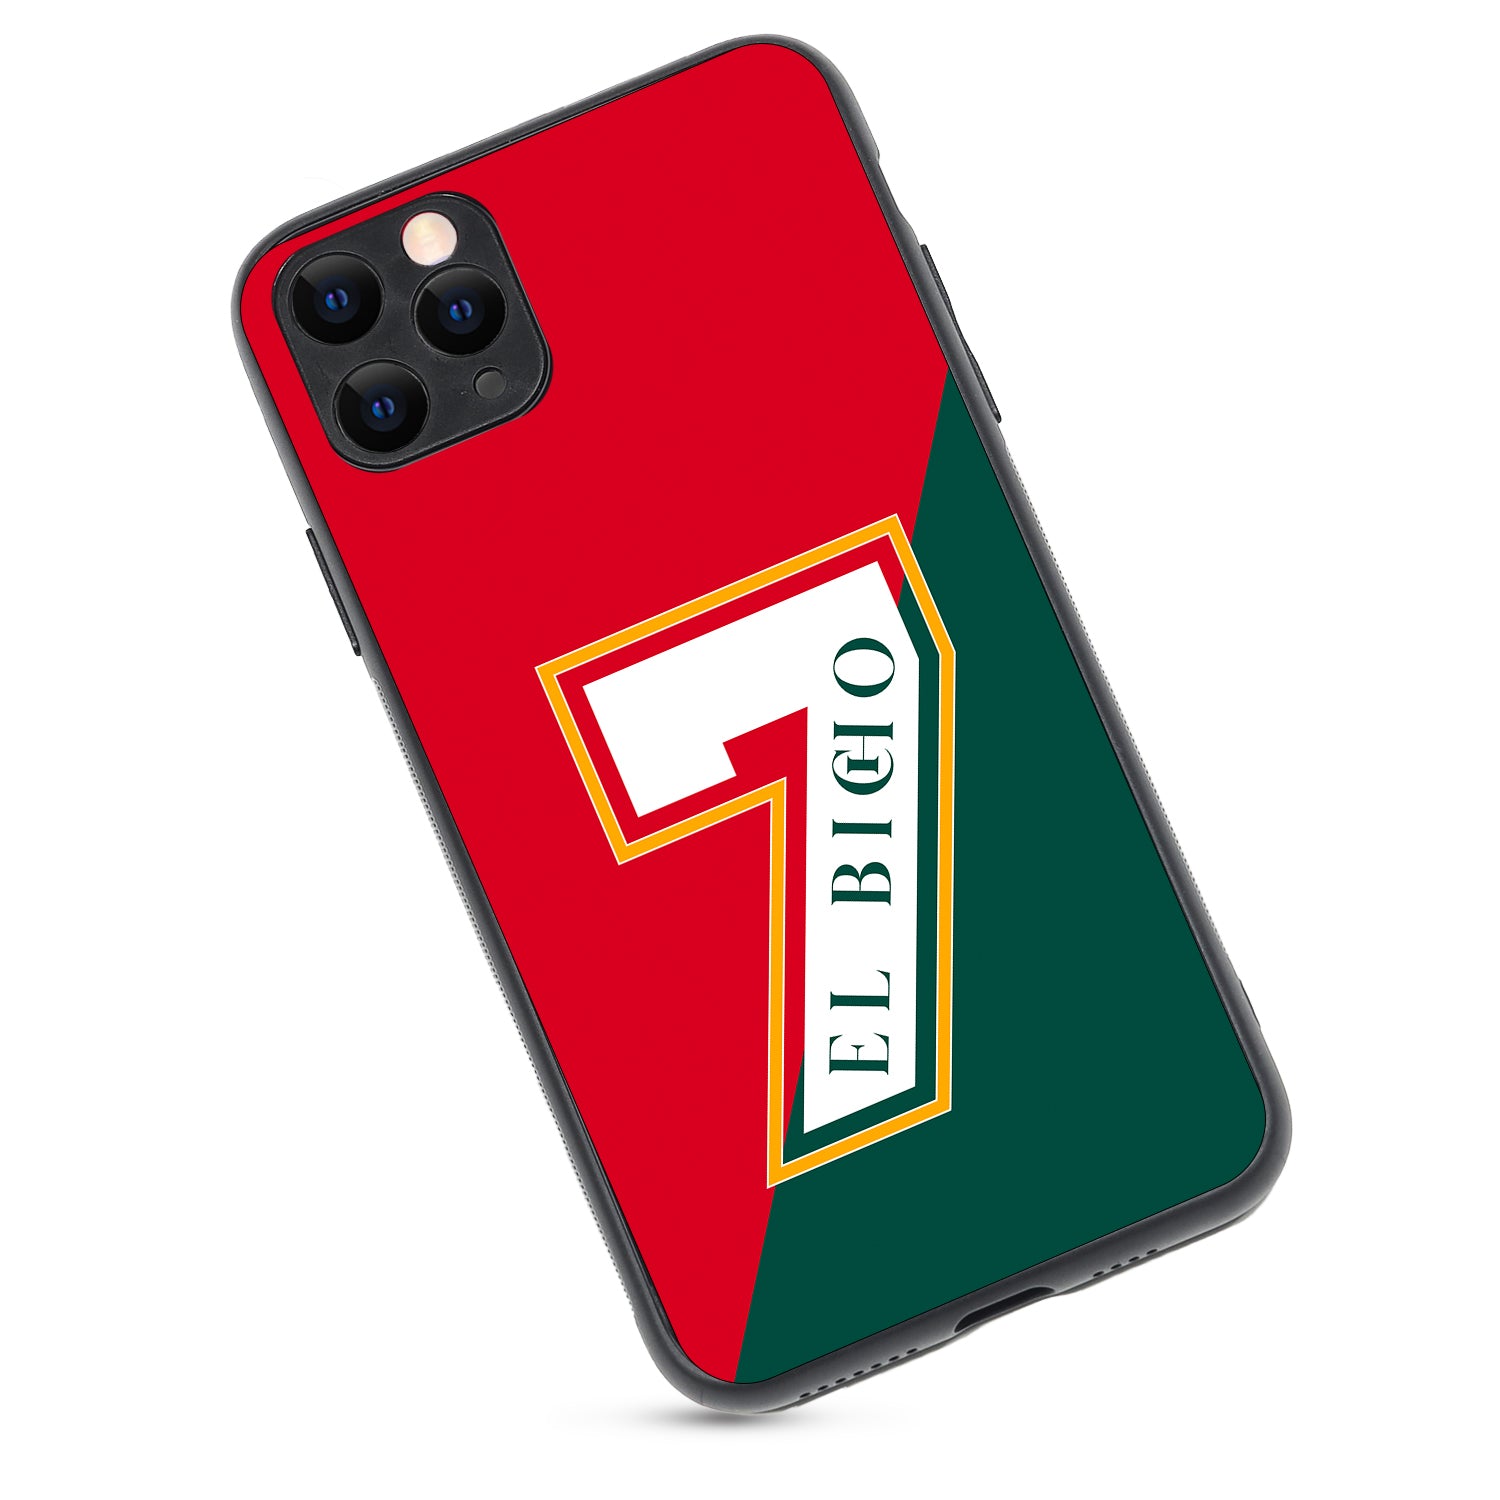 Jersey 7 Sports iPhone 11 Pro Max Case